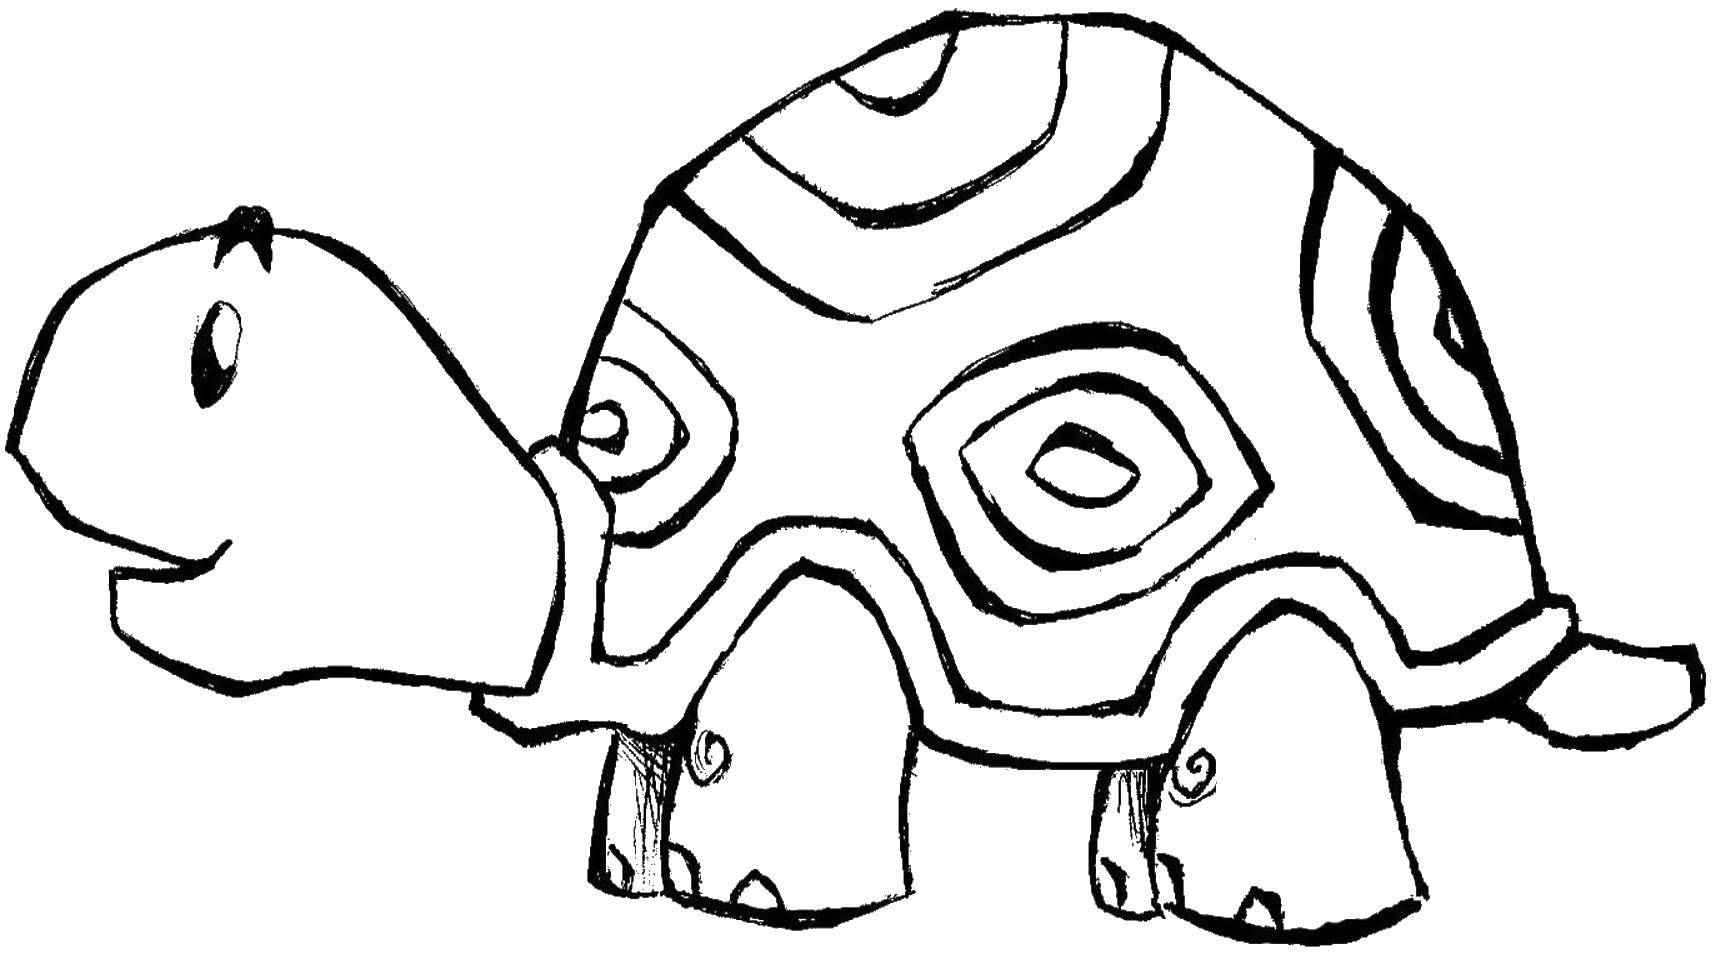 Coloring Turtle with beautiful shell. Category coloring. Tags:  turtle, shell.